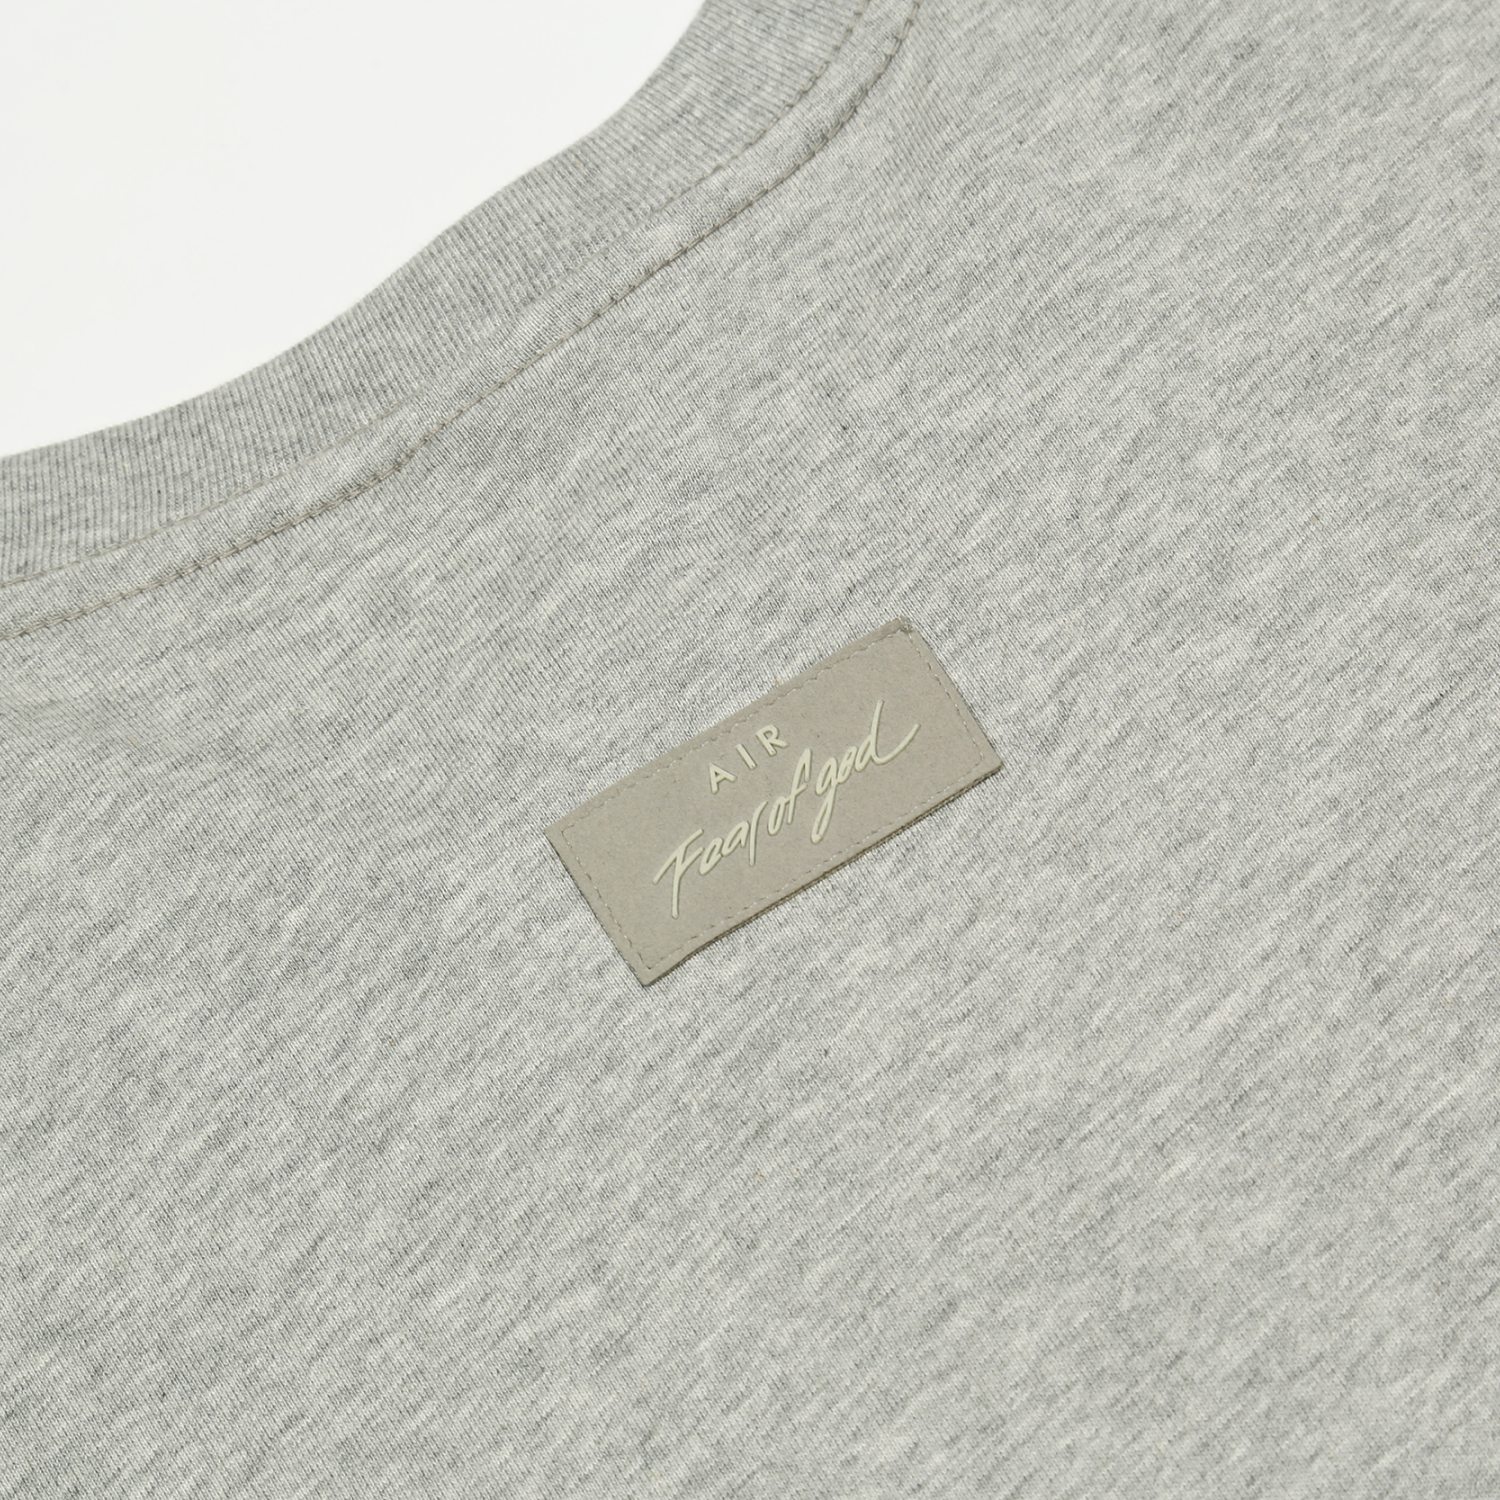 Review) Different shades of Grey/Oatmeal. : r/FearofGod